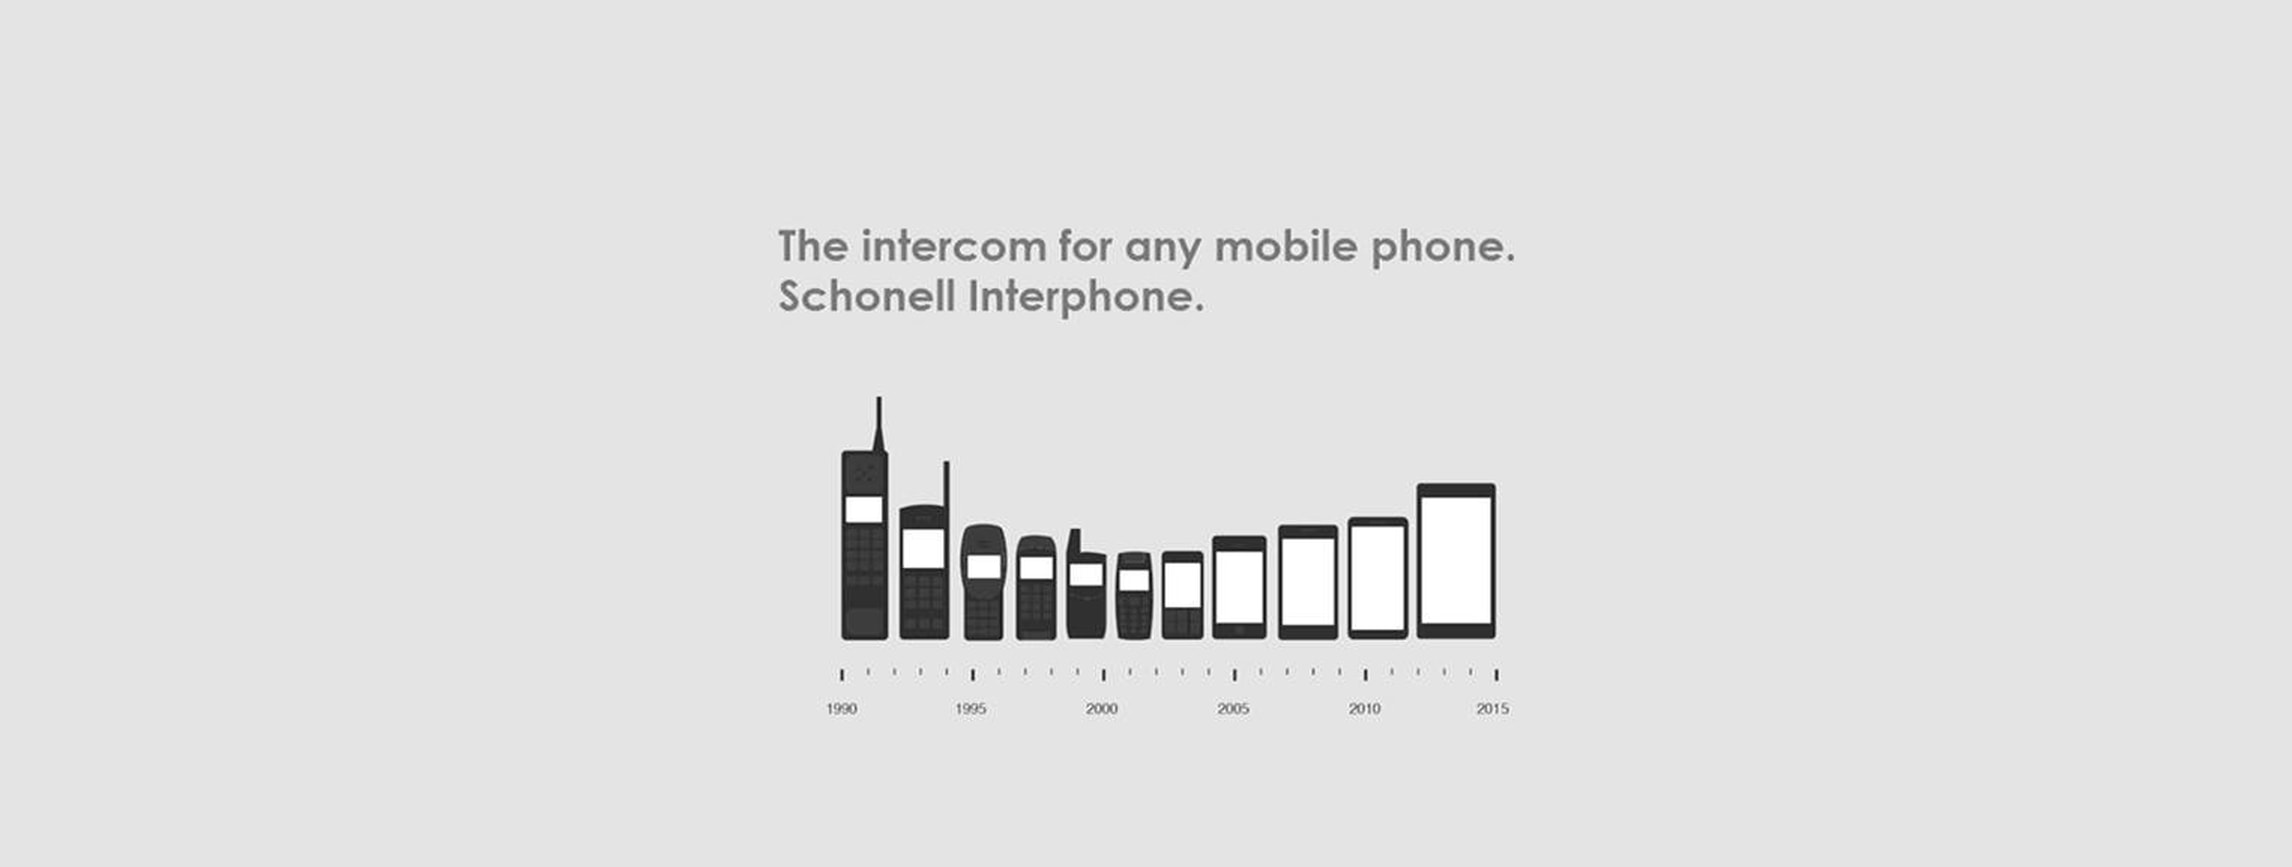 The intercom for any mobile phone: Schonell Interphone